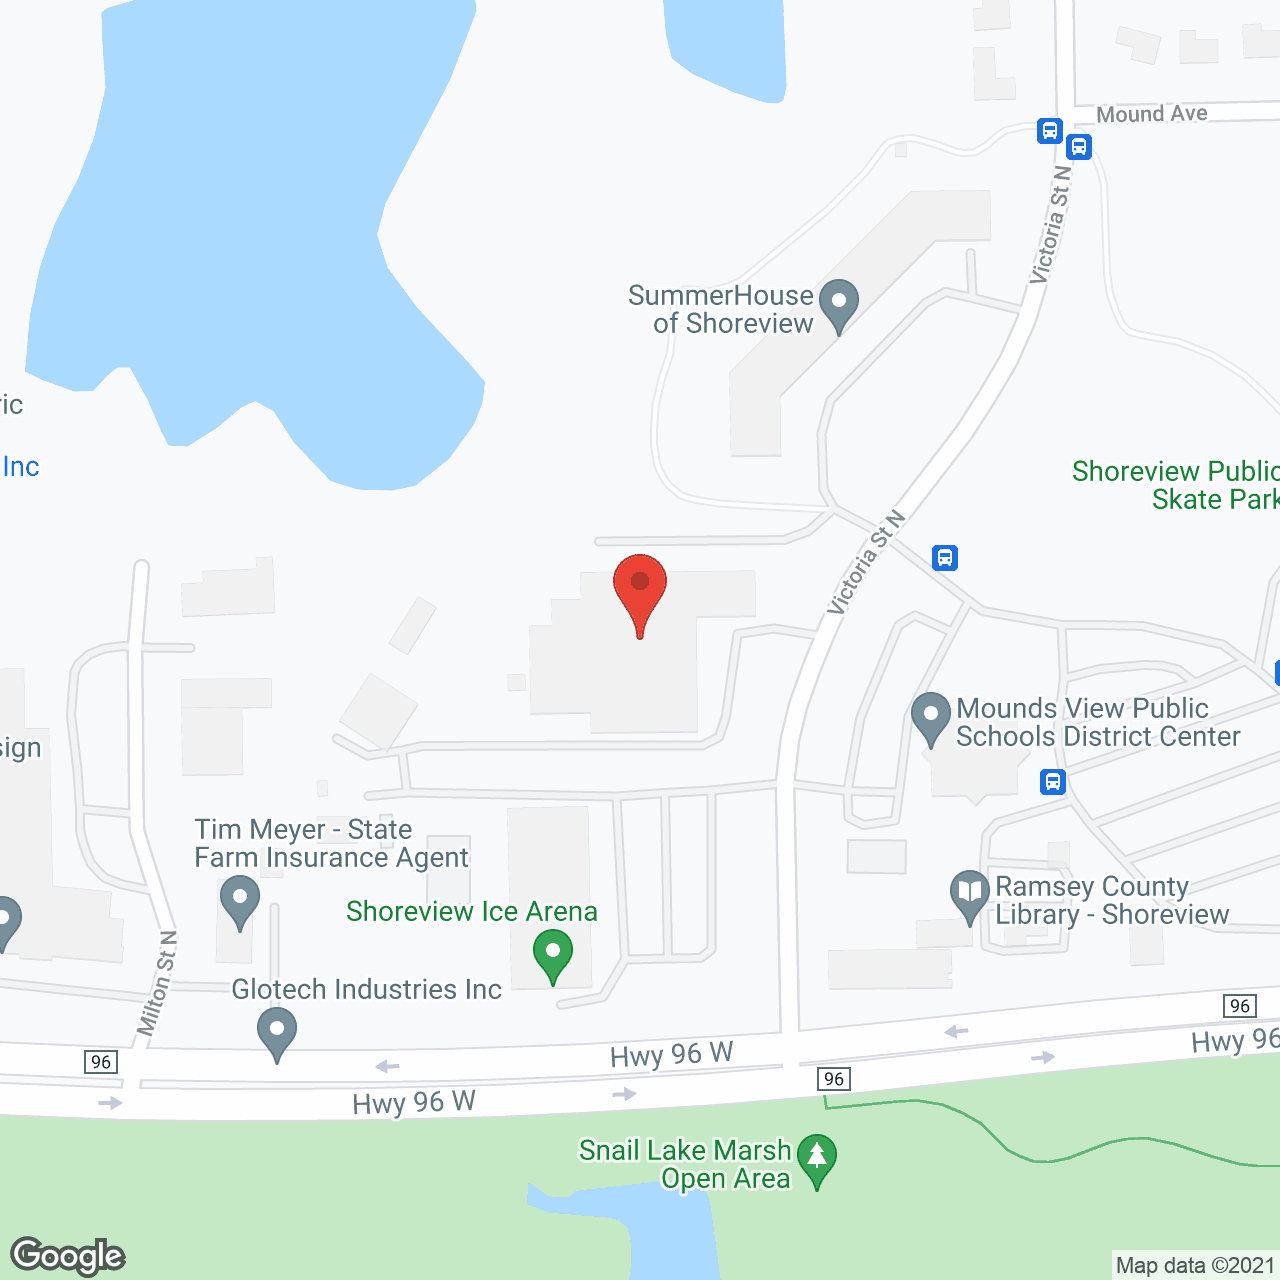 SummerHouse of Shoreview in google map